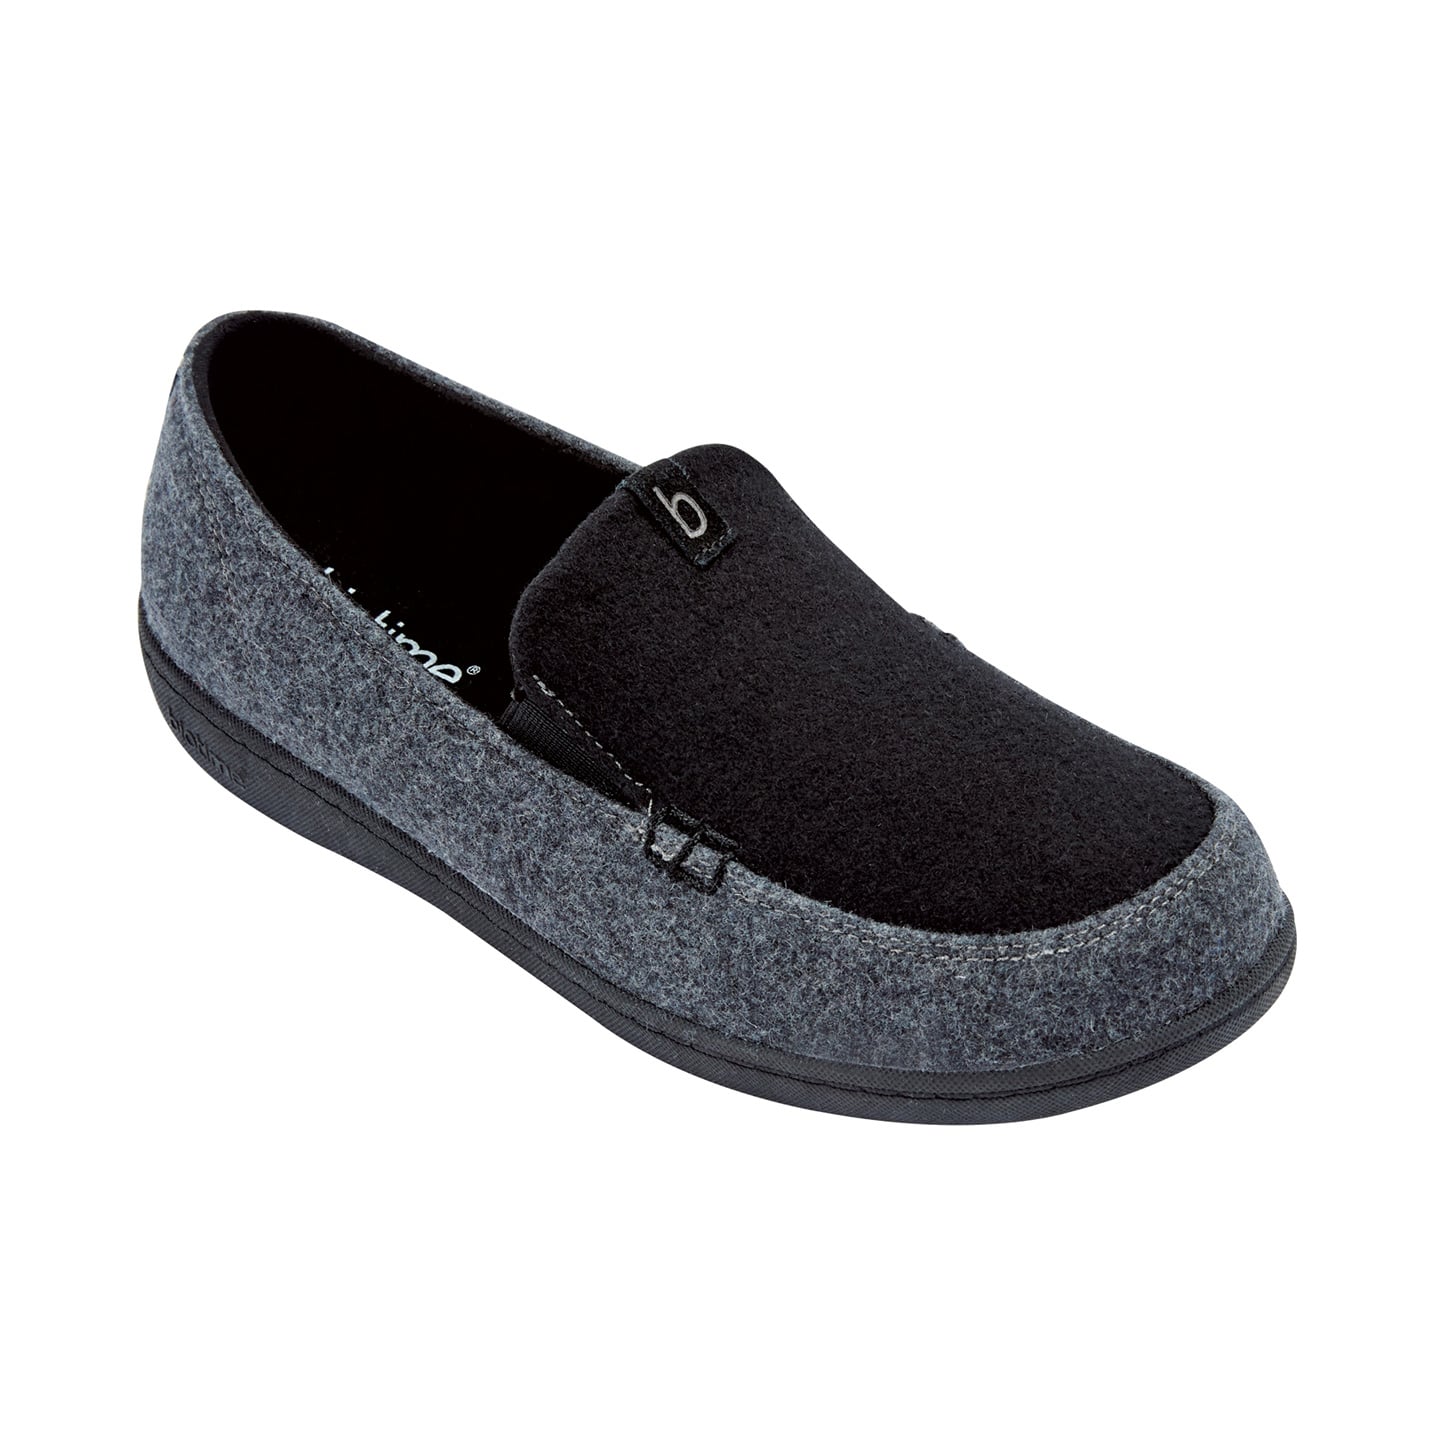 Biotime Men's Bennet Slippers with 